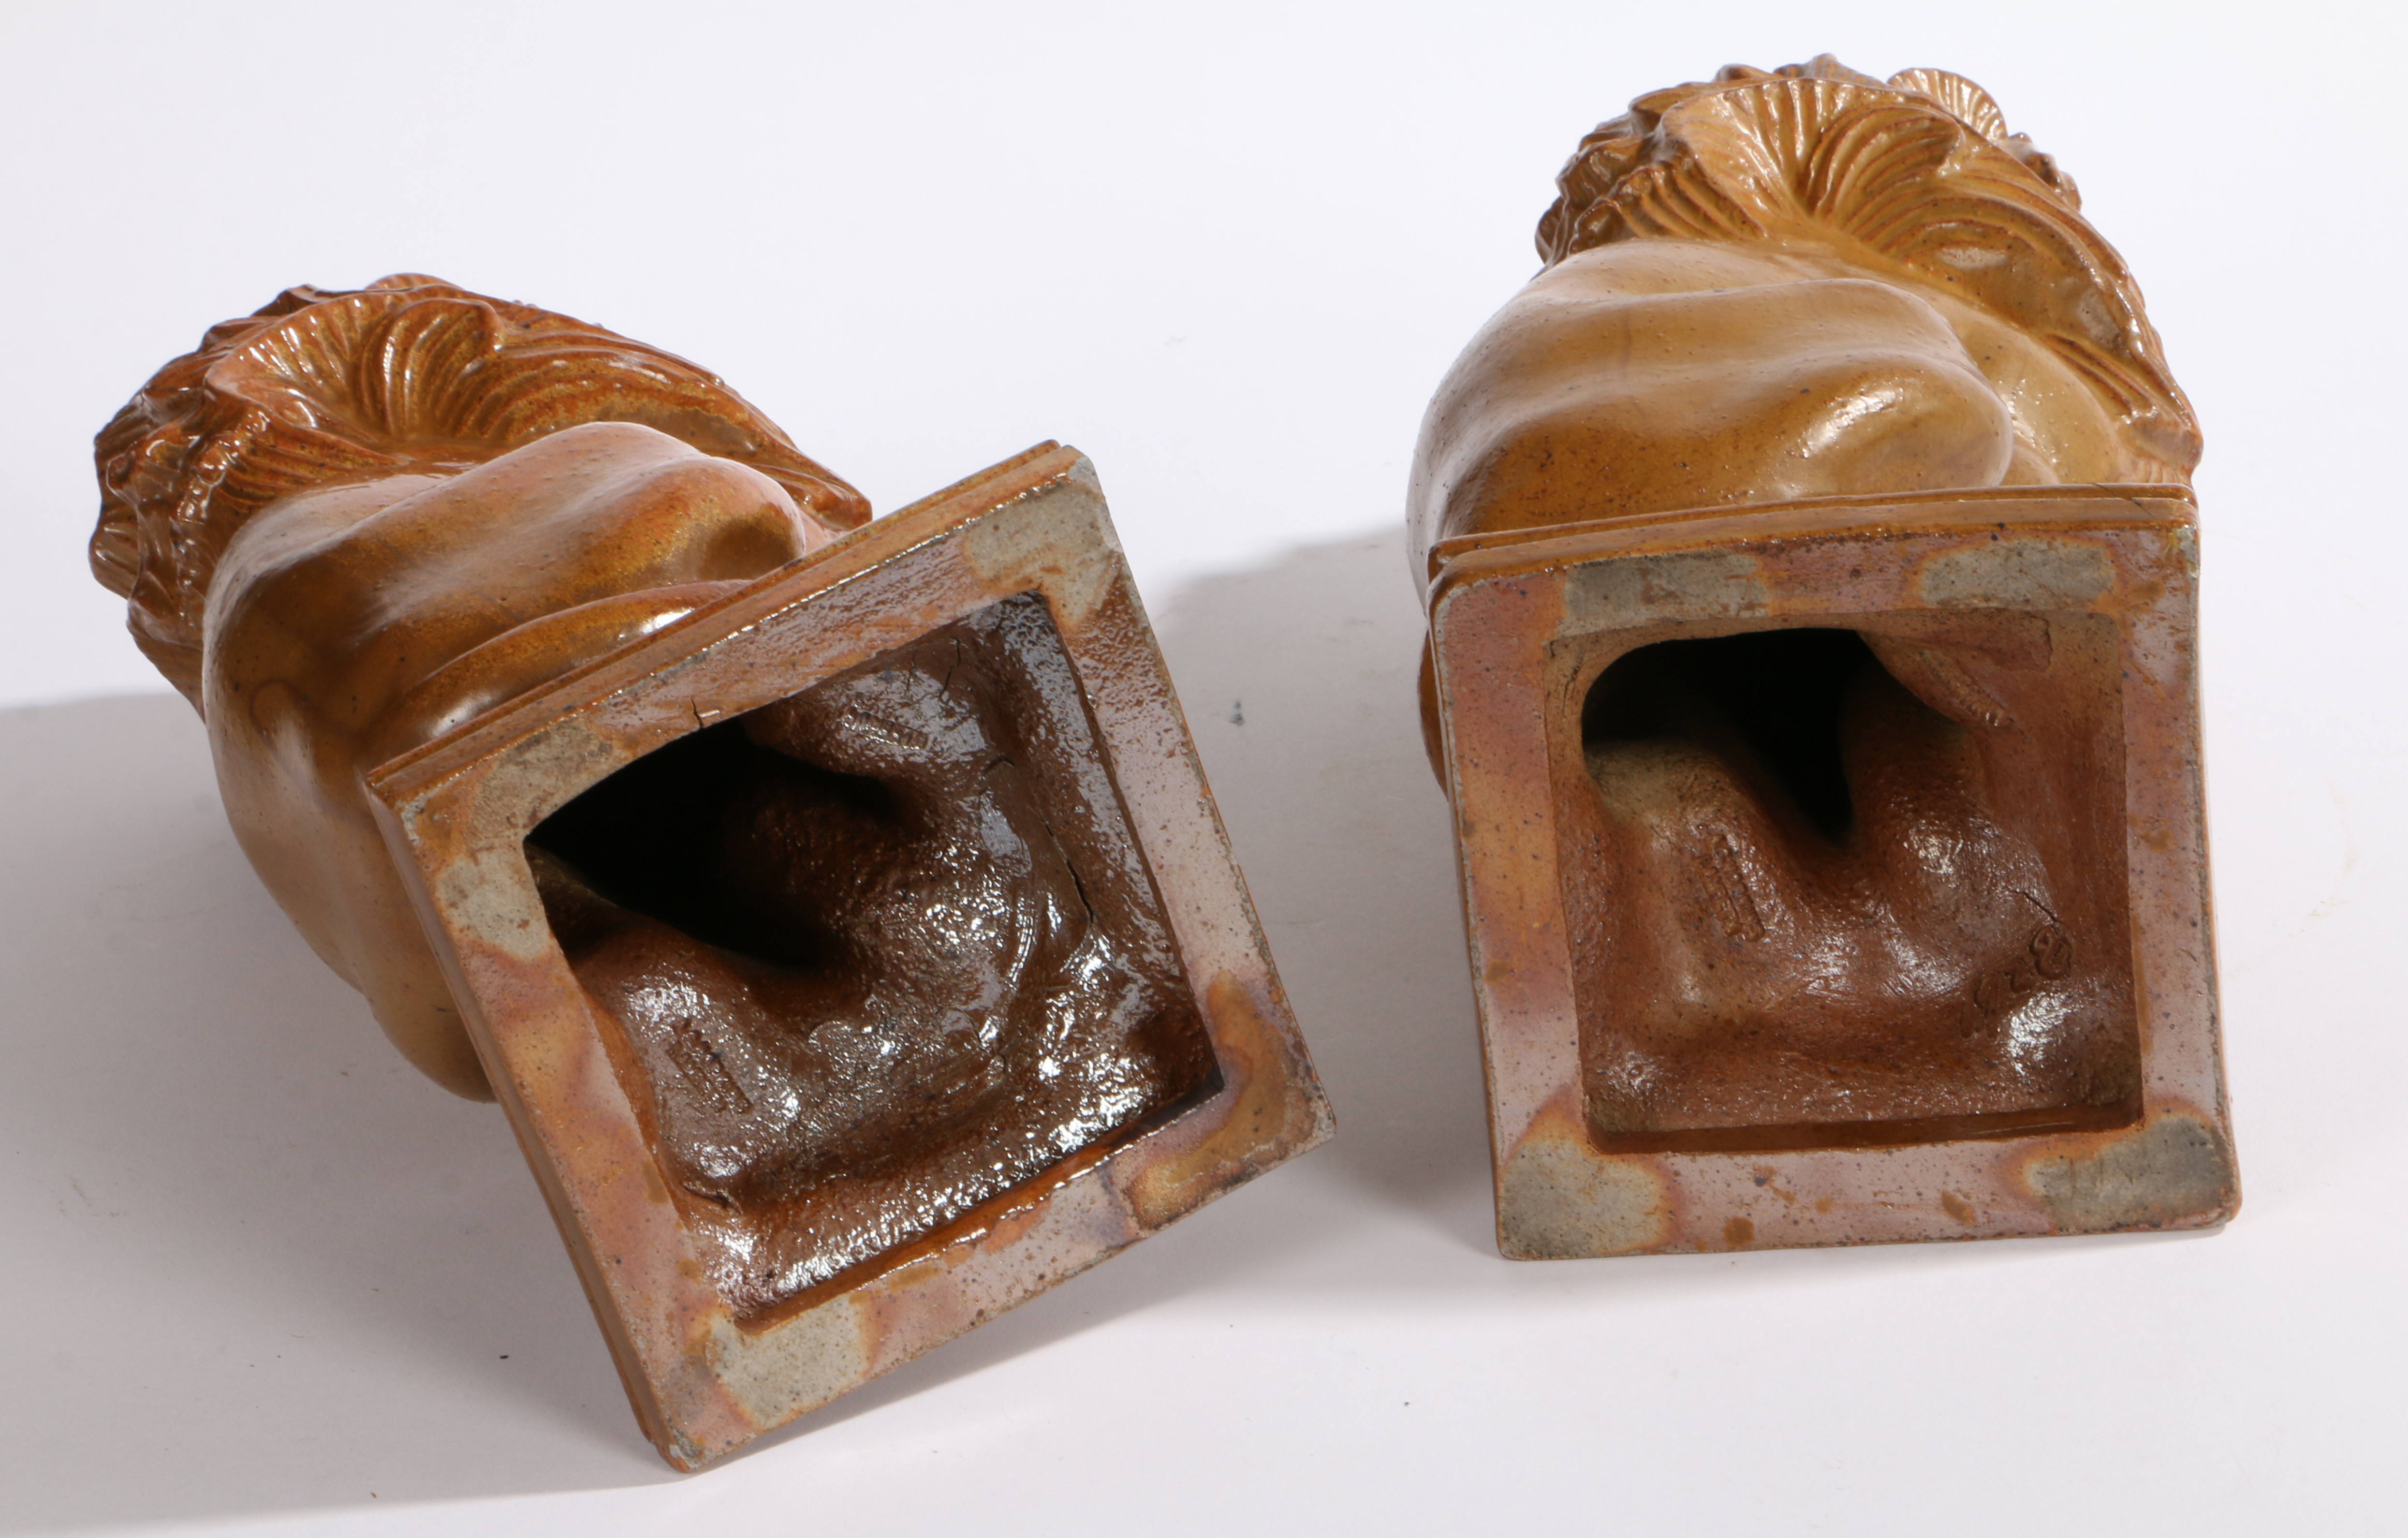 ALFRED G HOPKINS (1884-1940), A PAIR OF SALT GLAZED STONEWARE LIONS. - Image 4 of 4